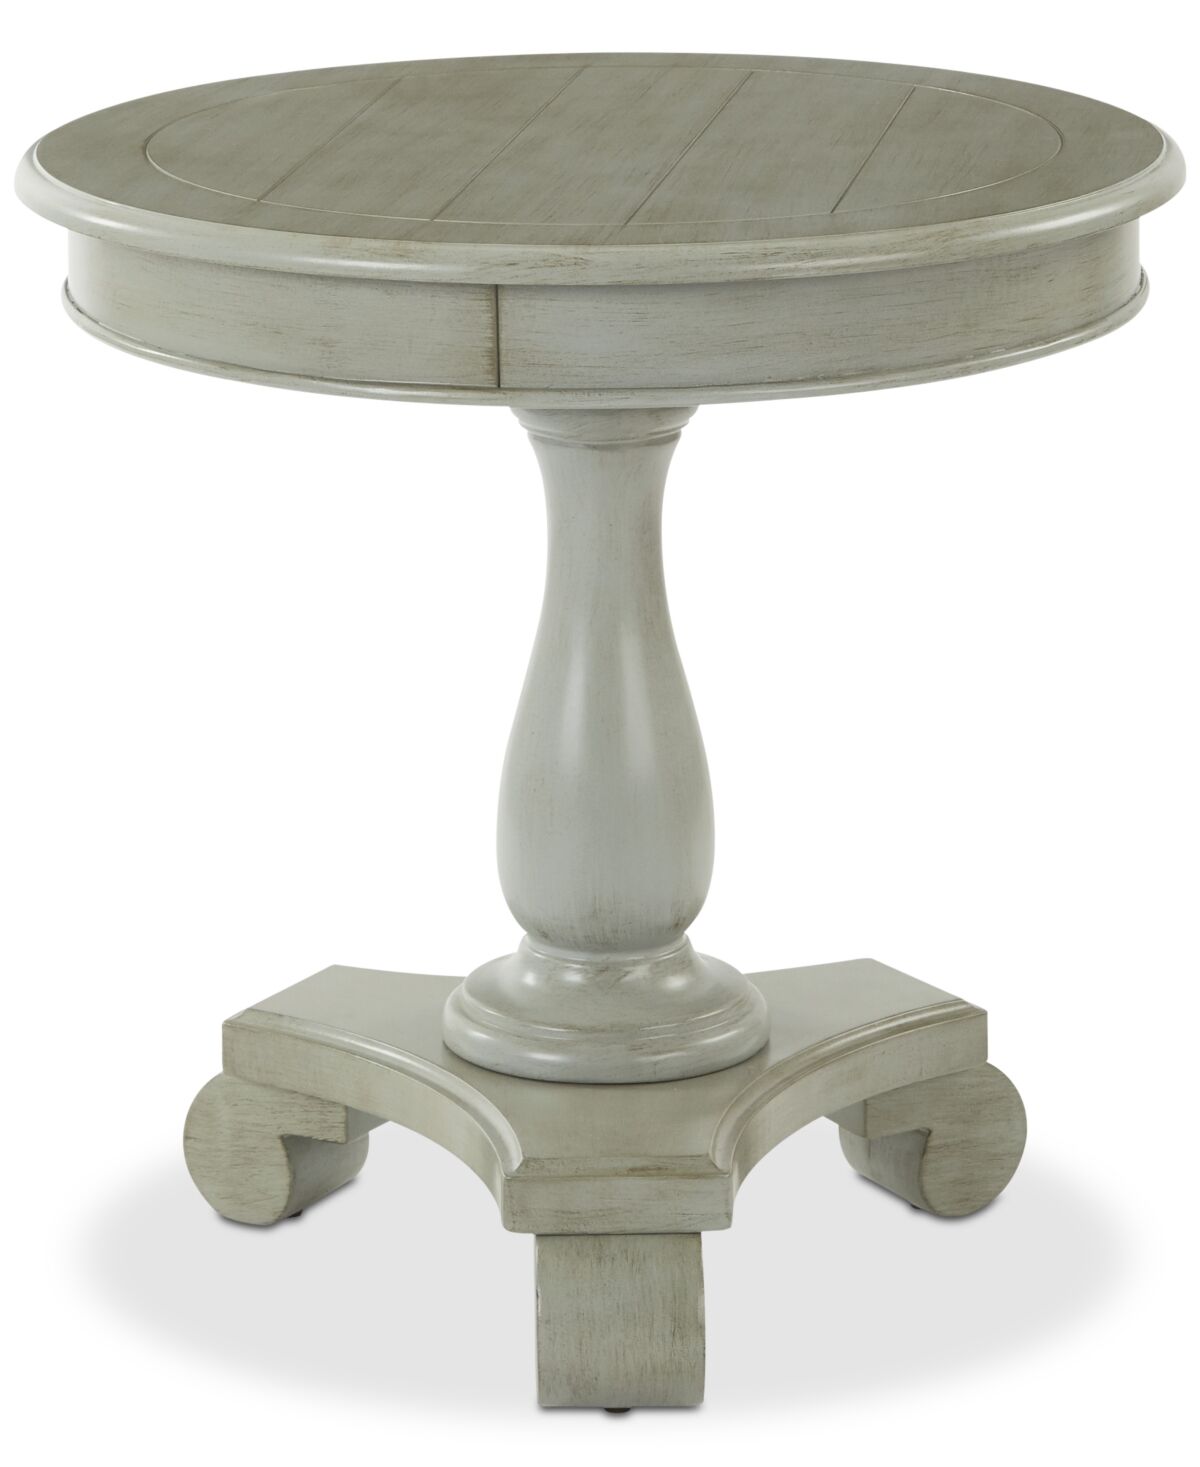 Office Star Wenta Accent Table - Grey